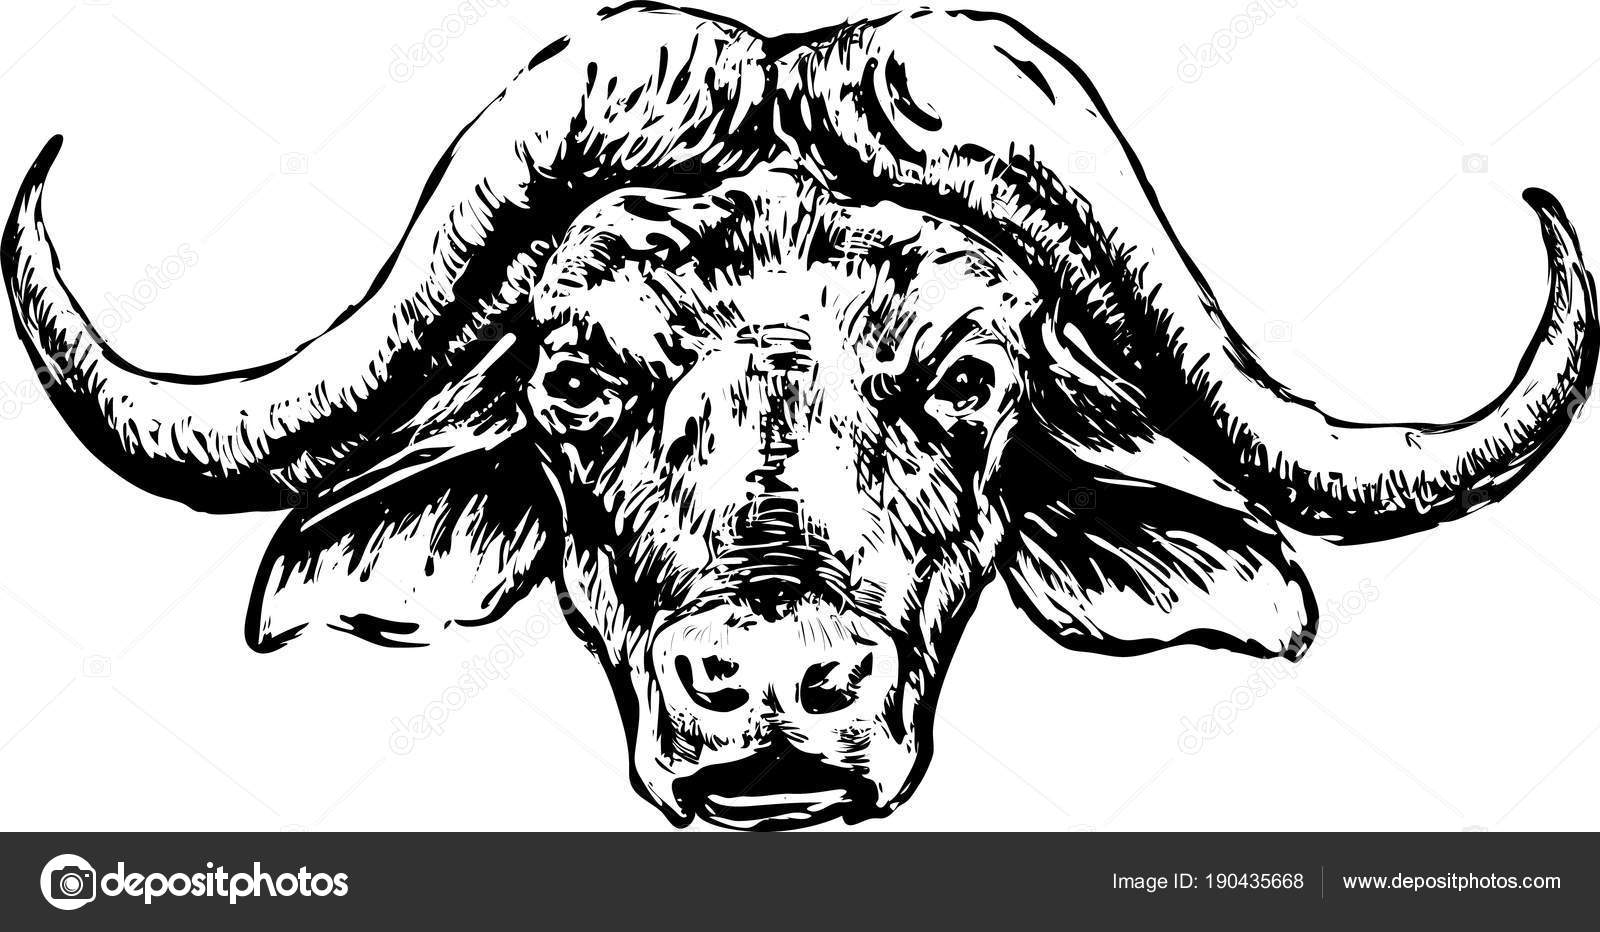 Download - Buffalo head on a white background. 